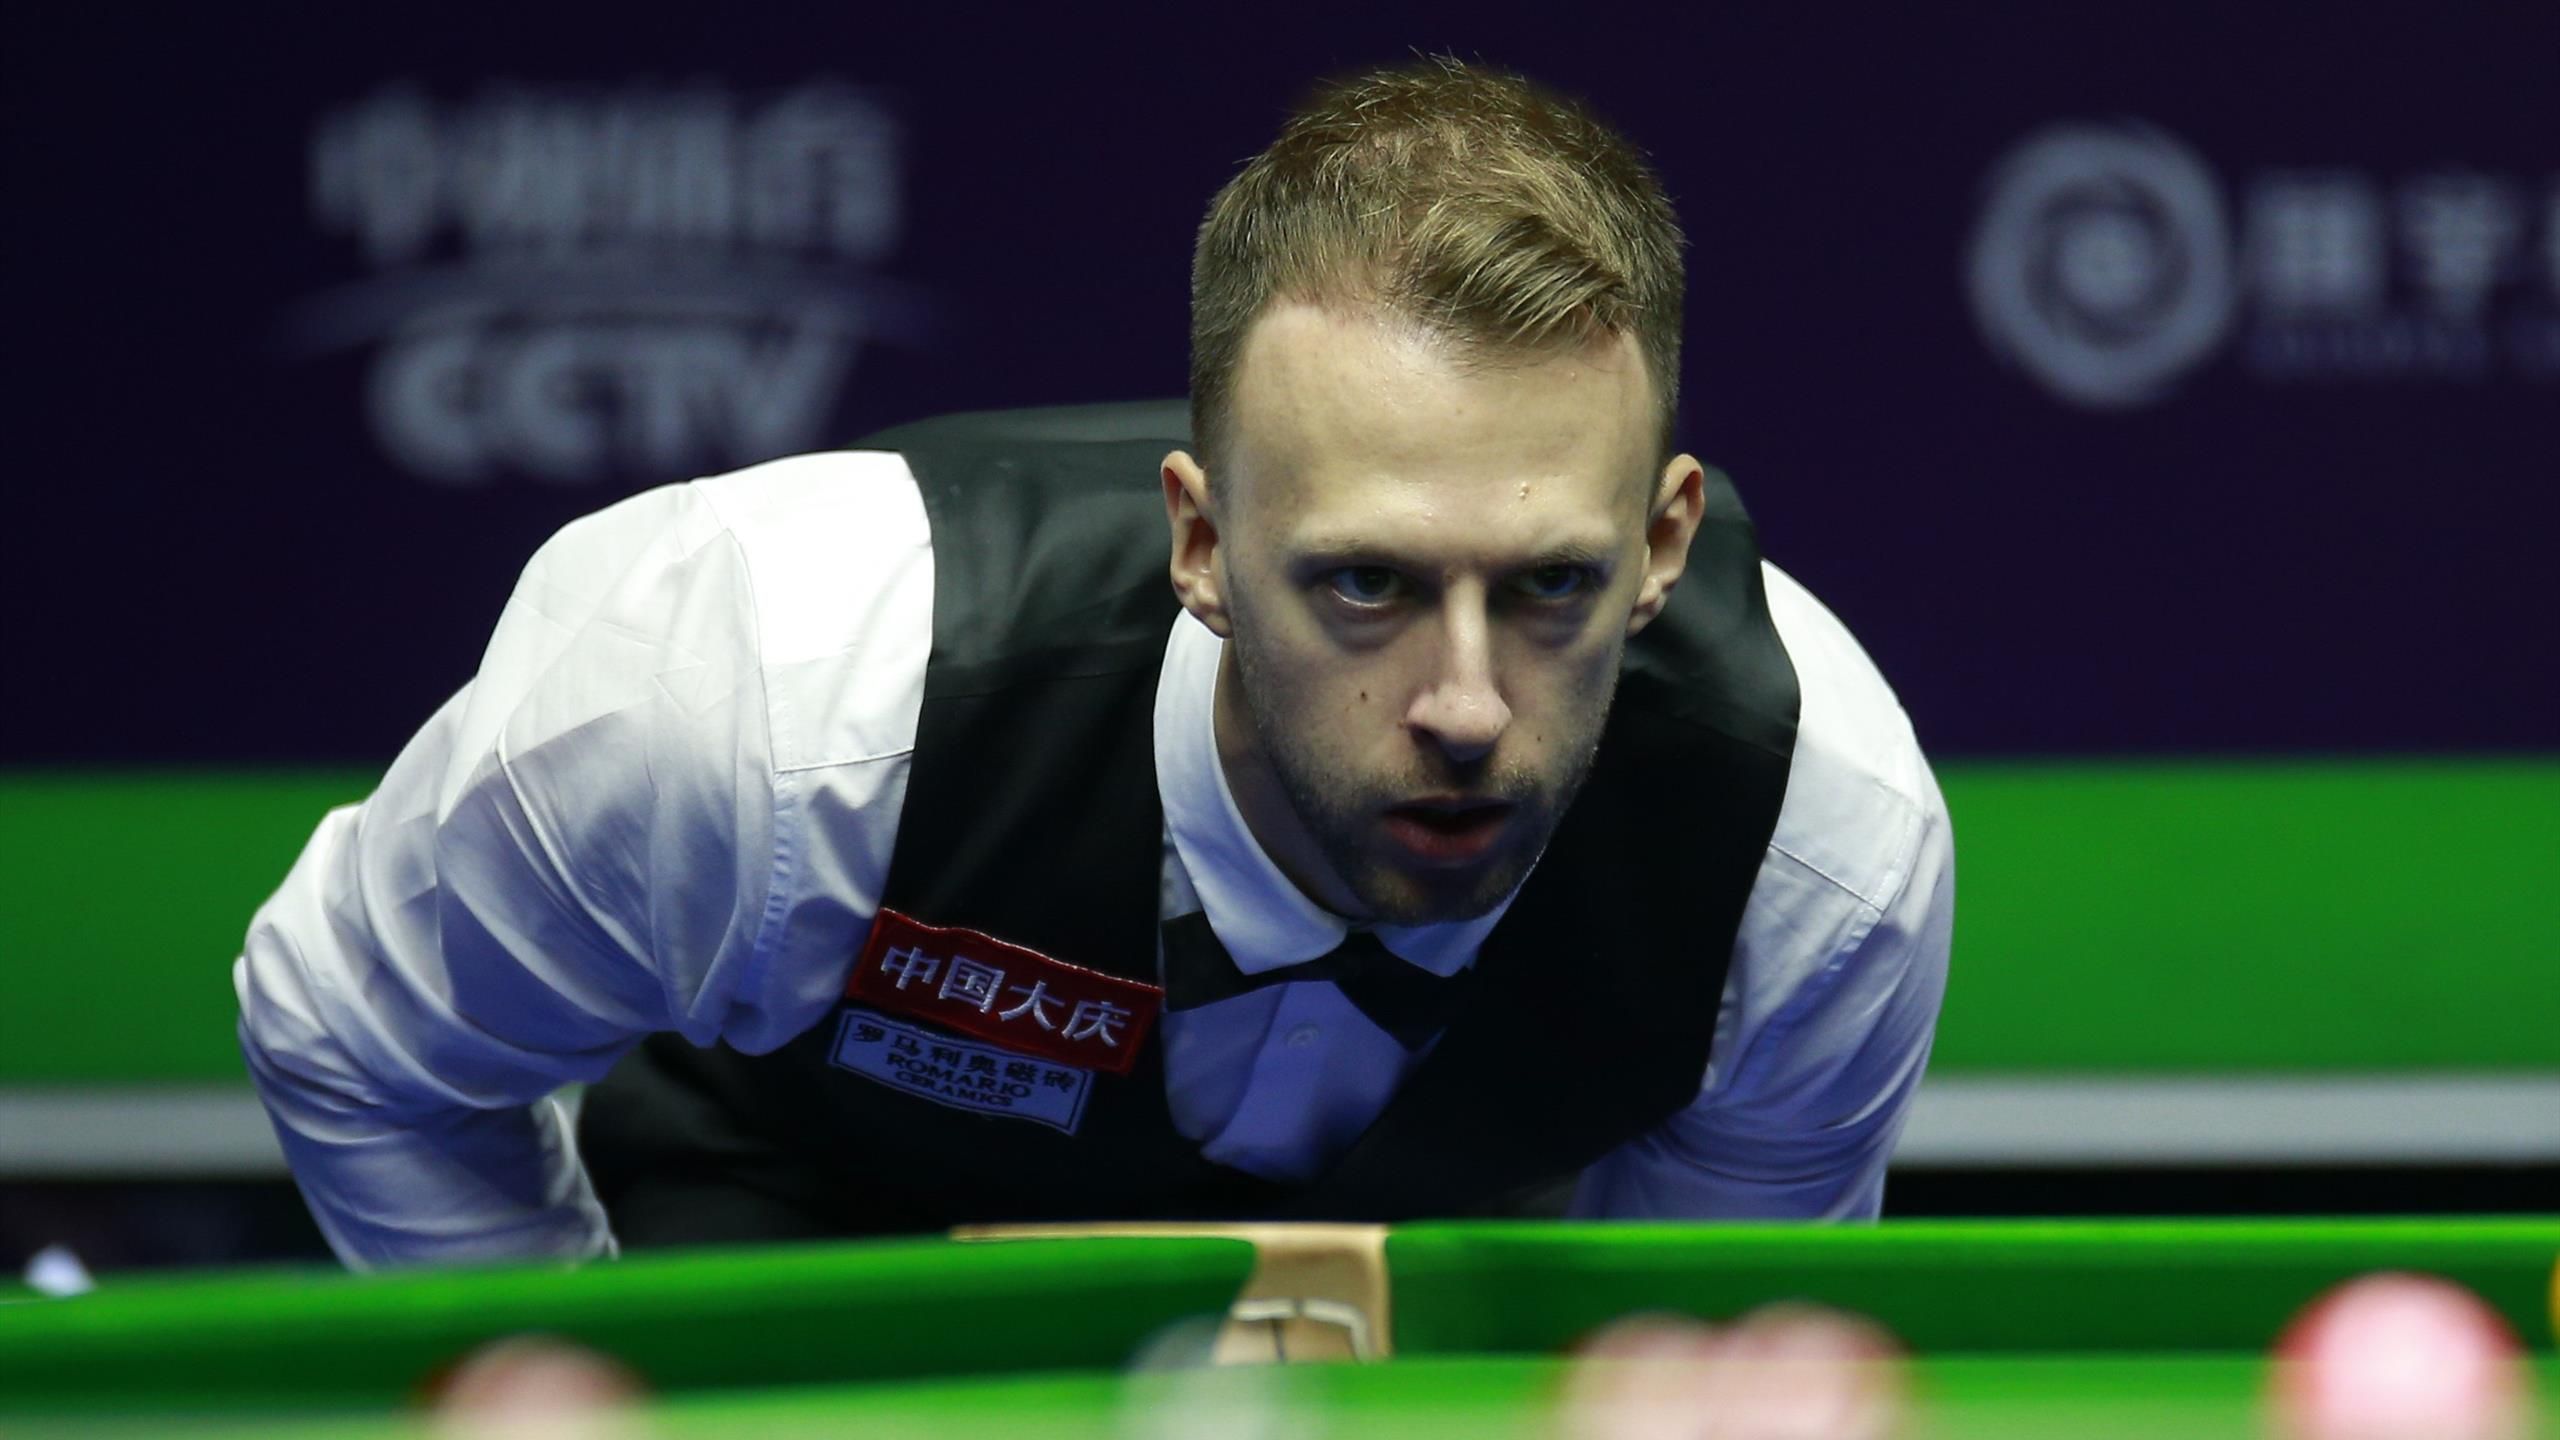 Snooker news - 2020 Championship League snooker Latest results, updated draw, venue